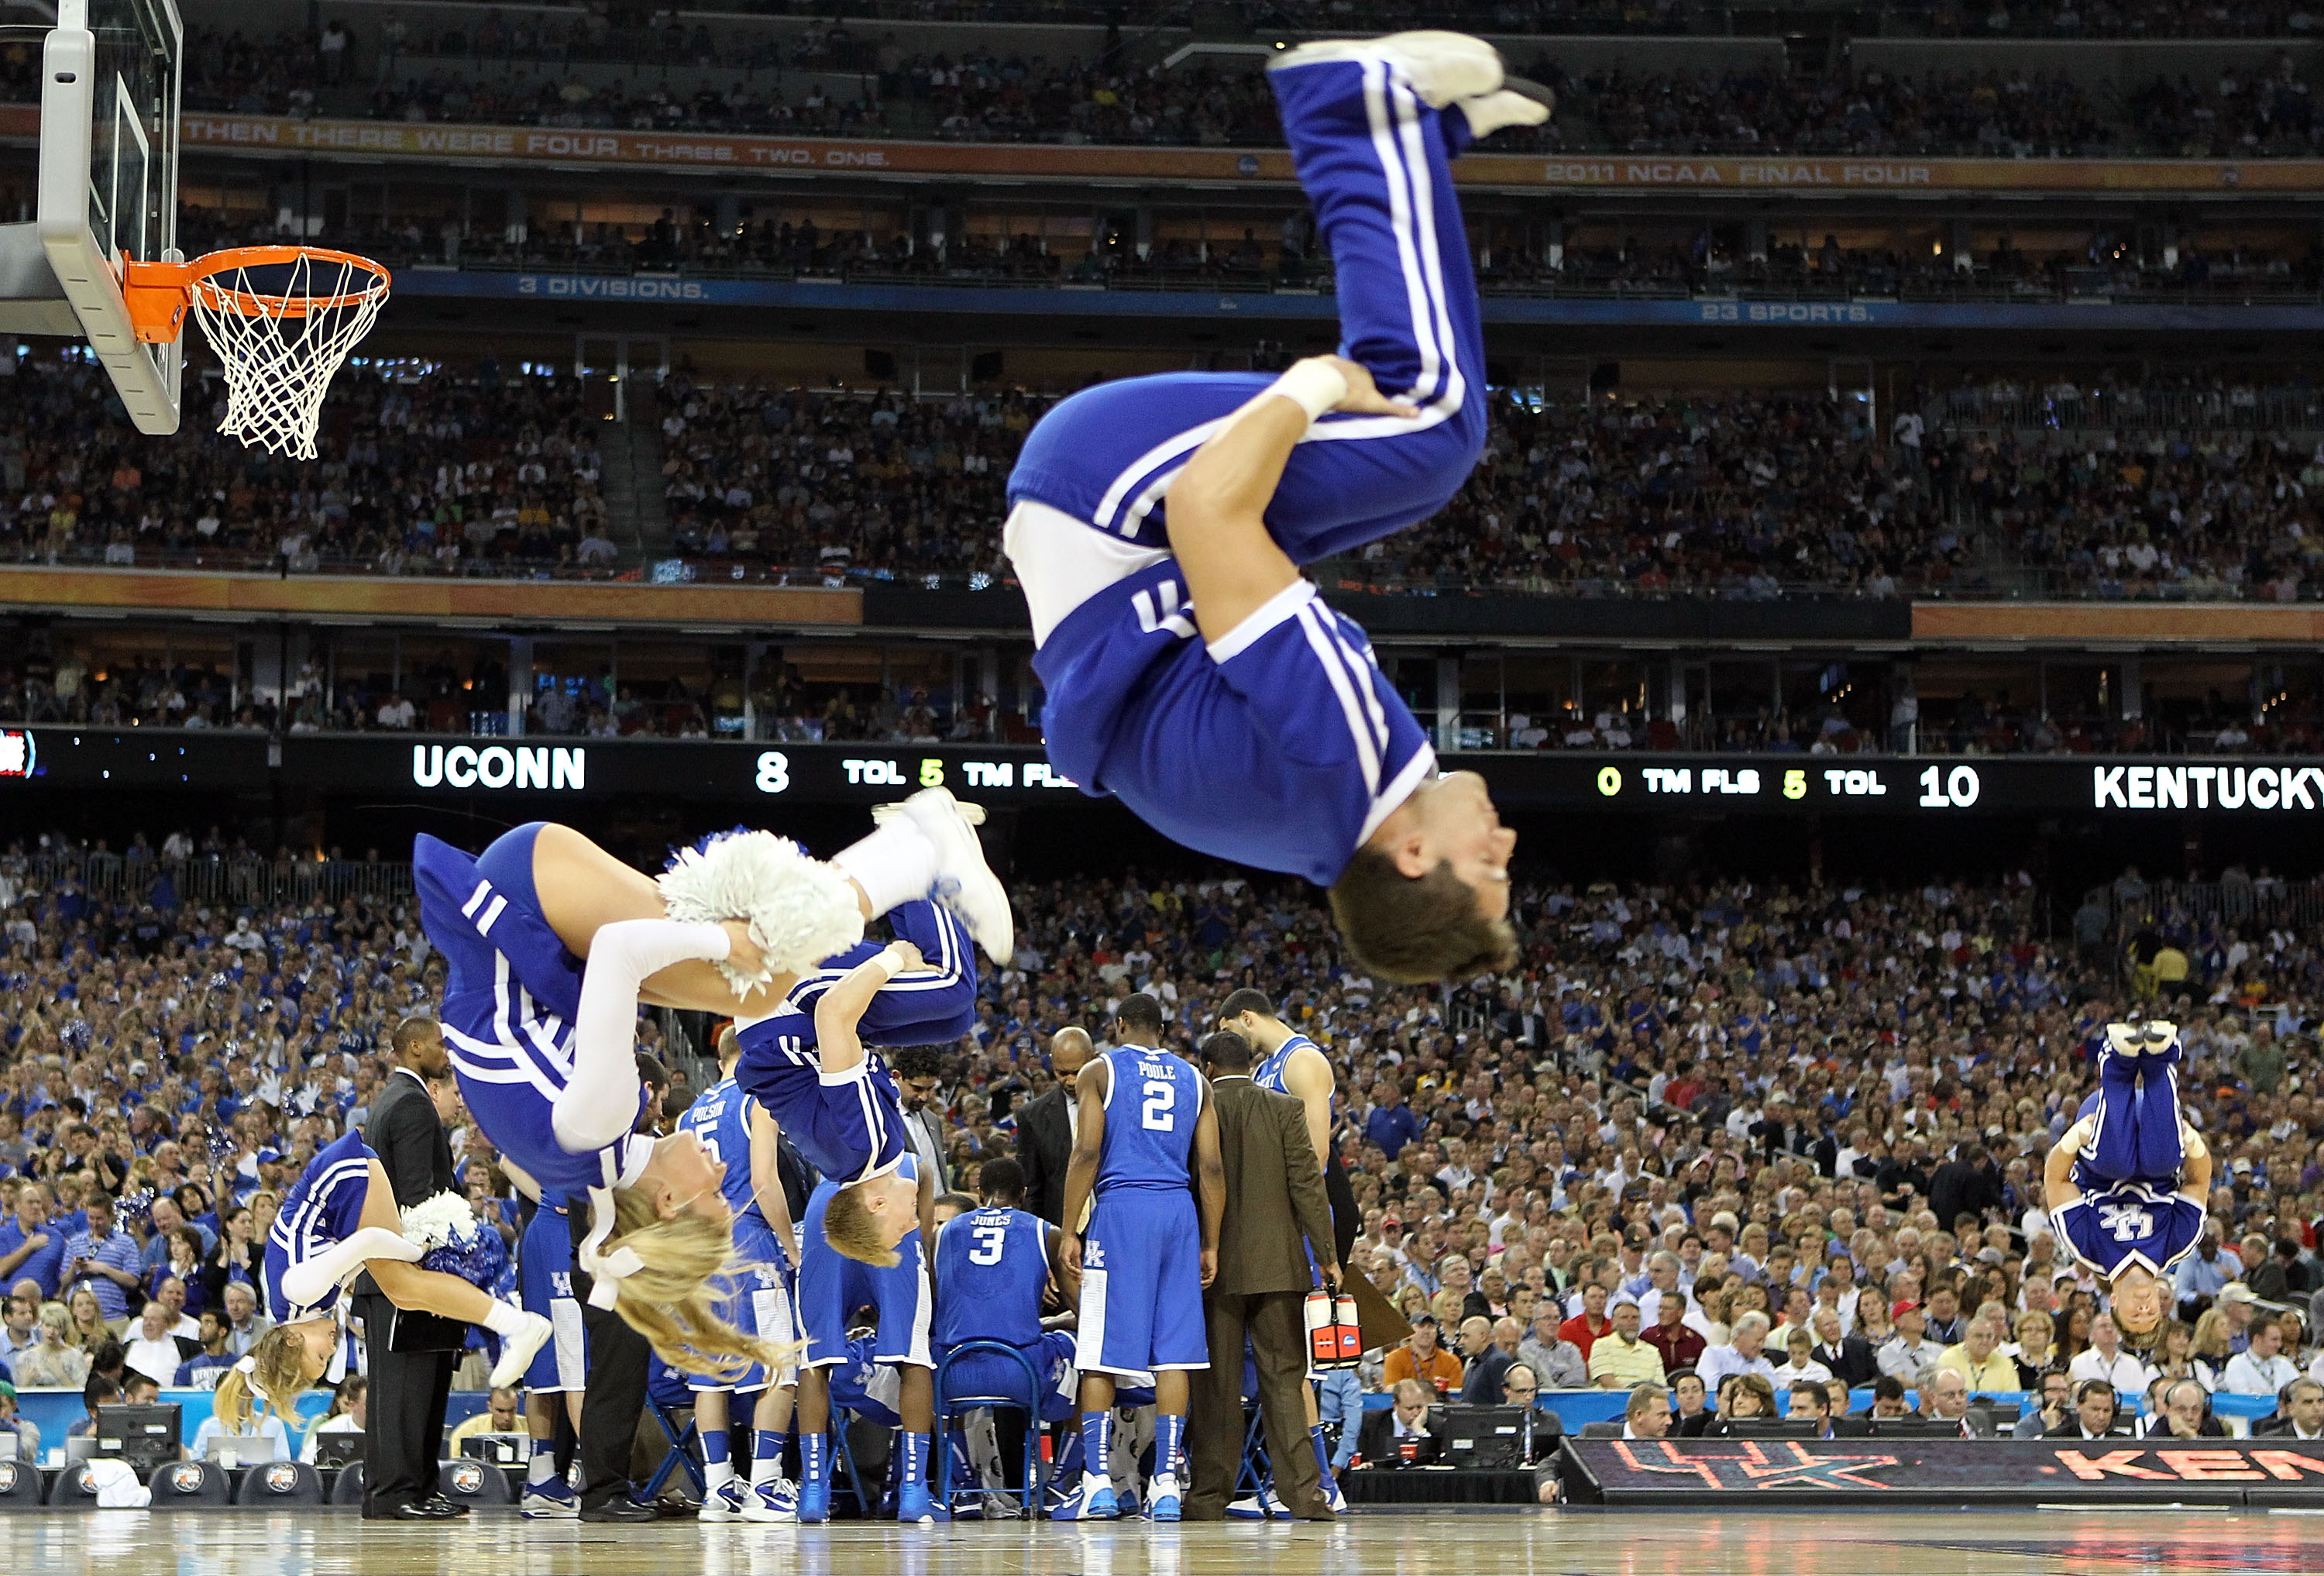 HOUSTON, TX - APRIL 02:  Cheerleaders from the Kentucky Wildcats performs during the National Semifinal game of the 2011 NCAA Division I Men's Basketball Championship at Reliant Stadium on April 2, 2011 in Houston, Texas.  (Photo by Streeter Lecka/Getty I